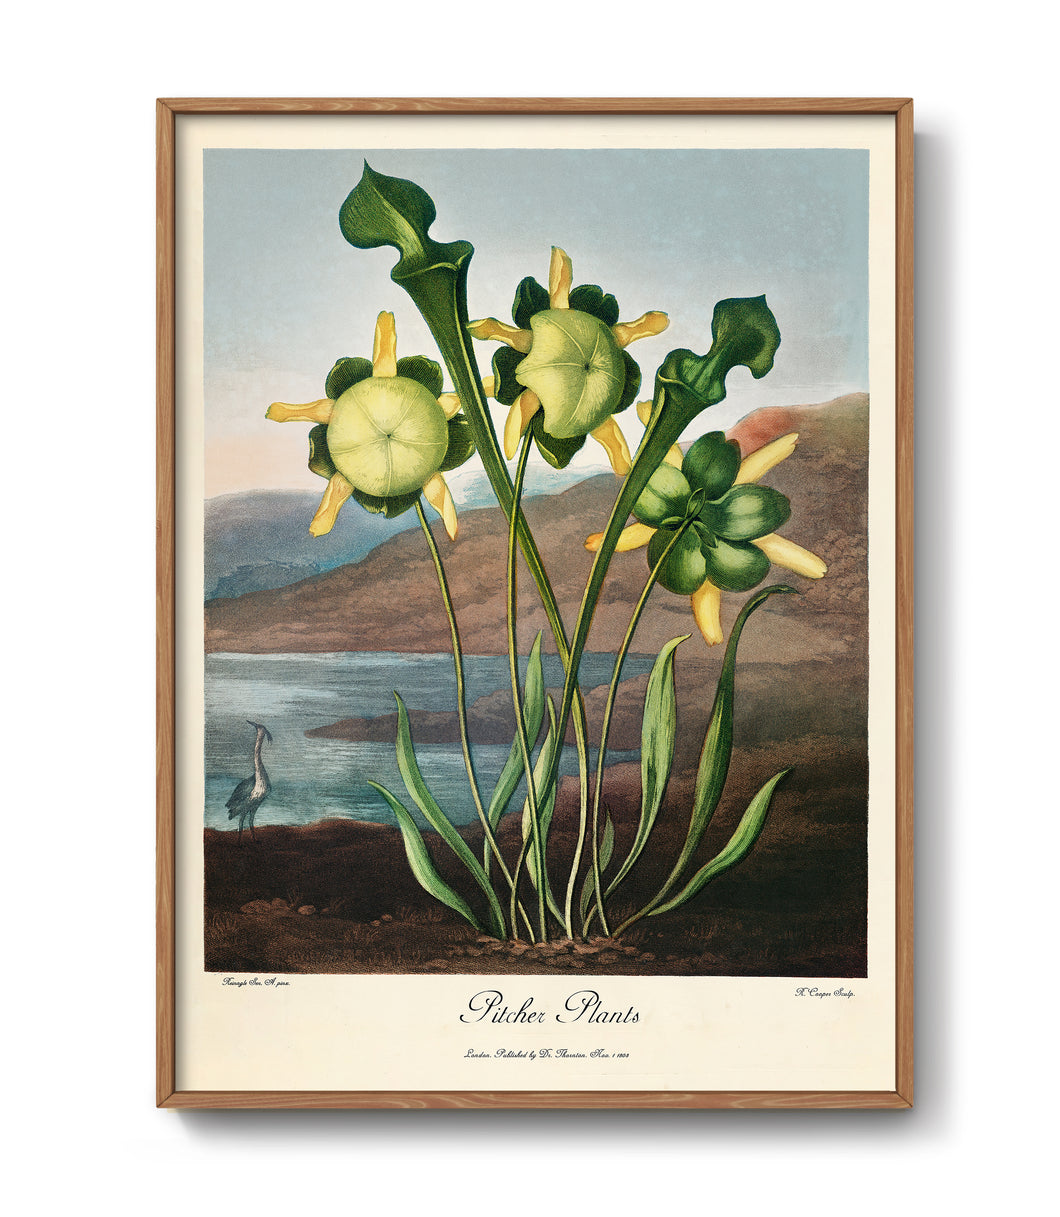 Pitcher Plant from The Temple of Flora (1807)